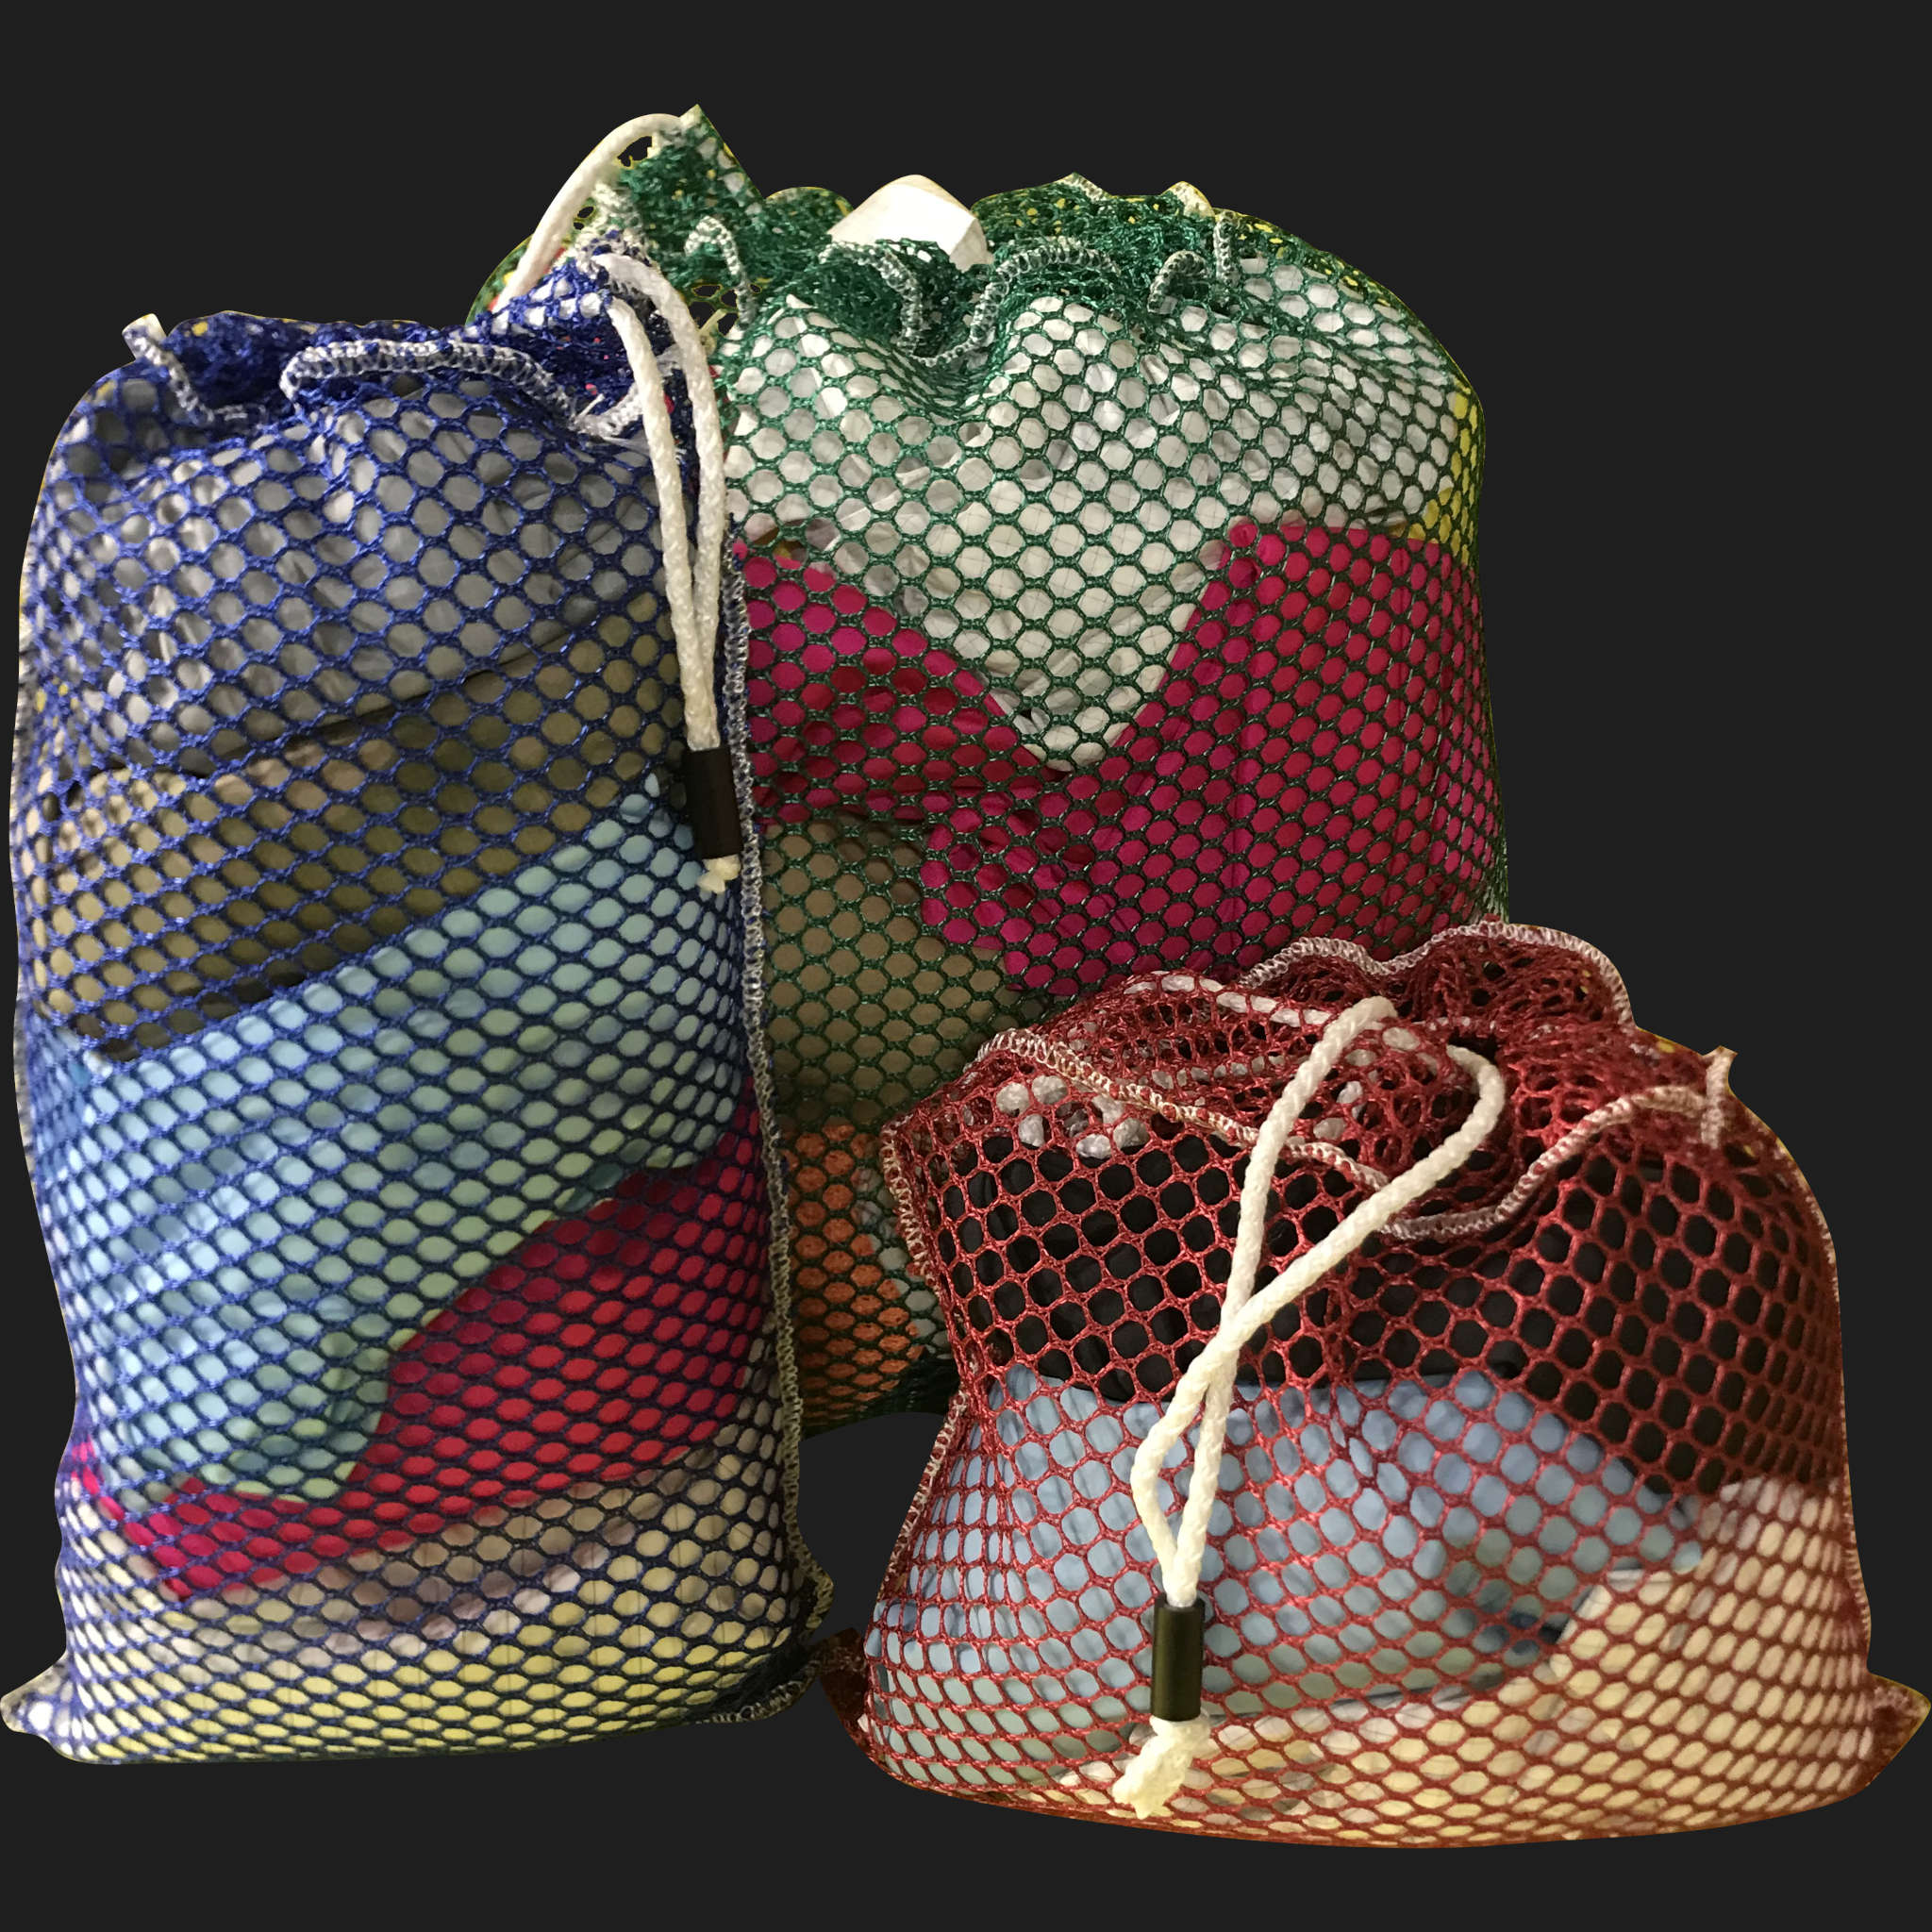 26" x 42" Customized Mesh-Net-Laundry Bags Heavy Duty with Cord and barrellock closure